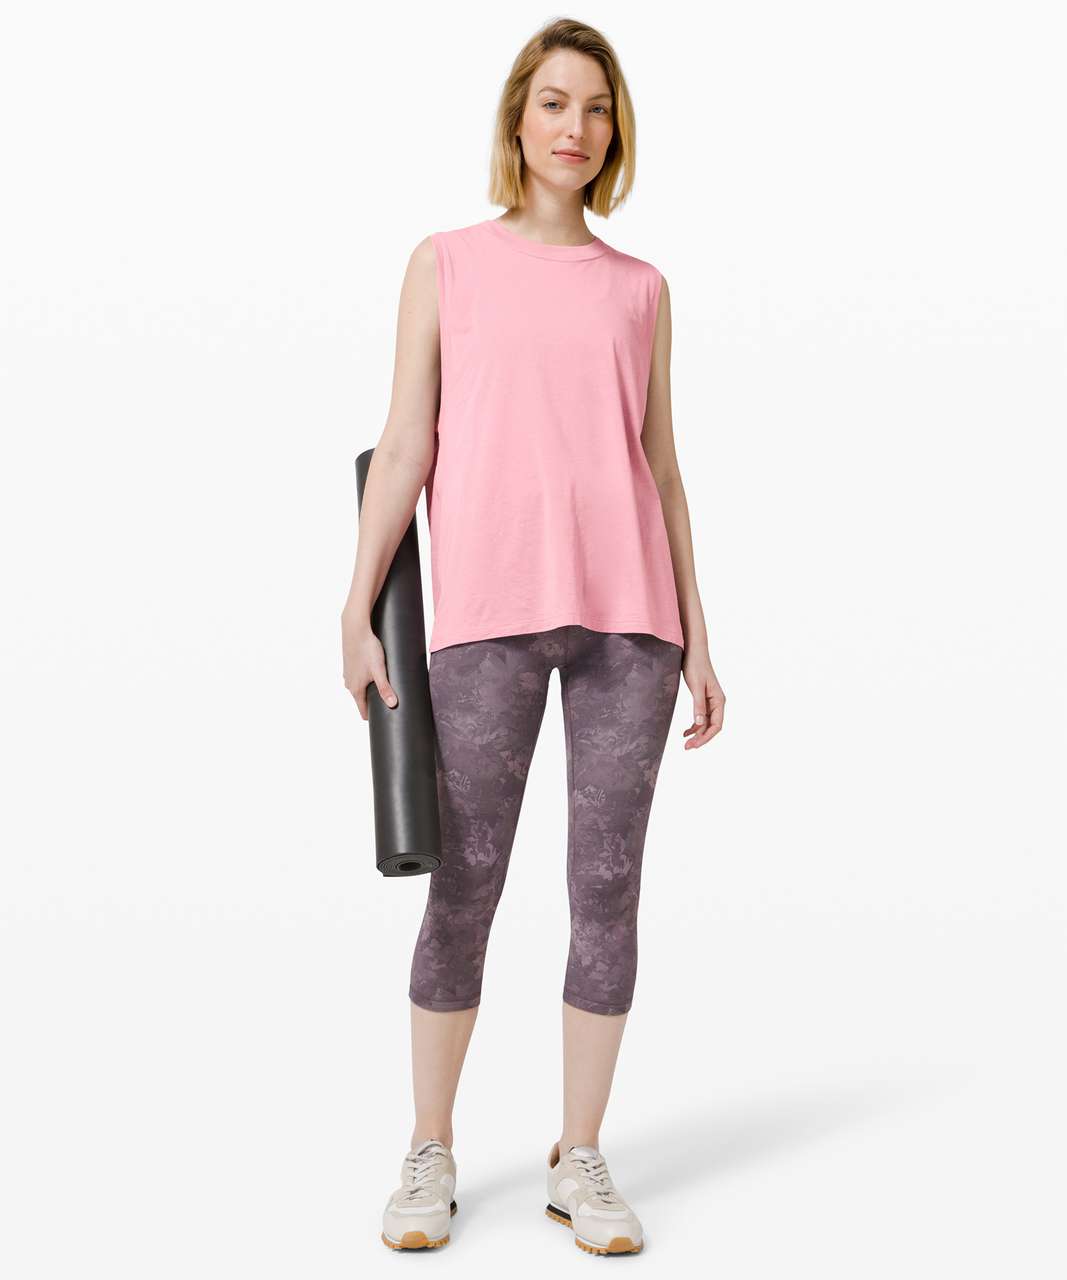 Lululemon All Yours Boyfriend Tank - Pink Taupe